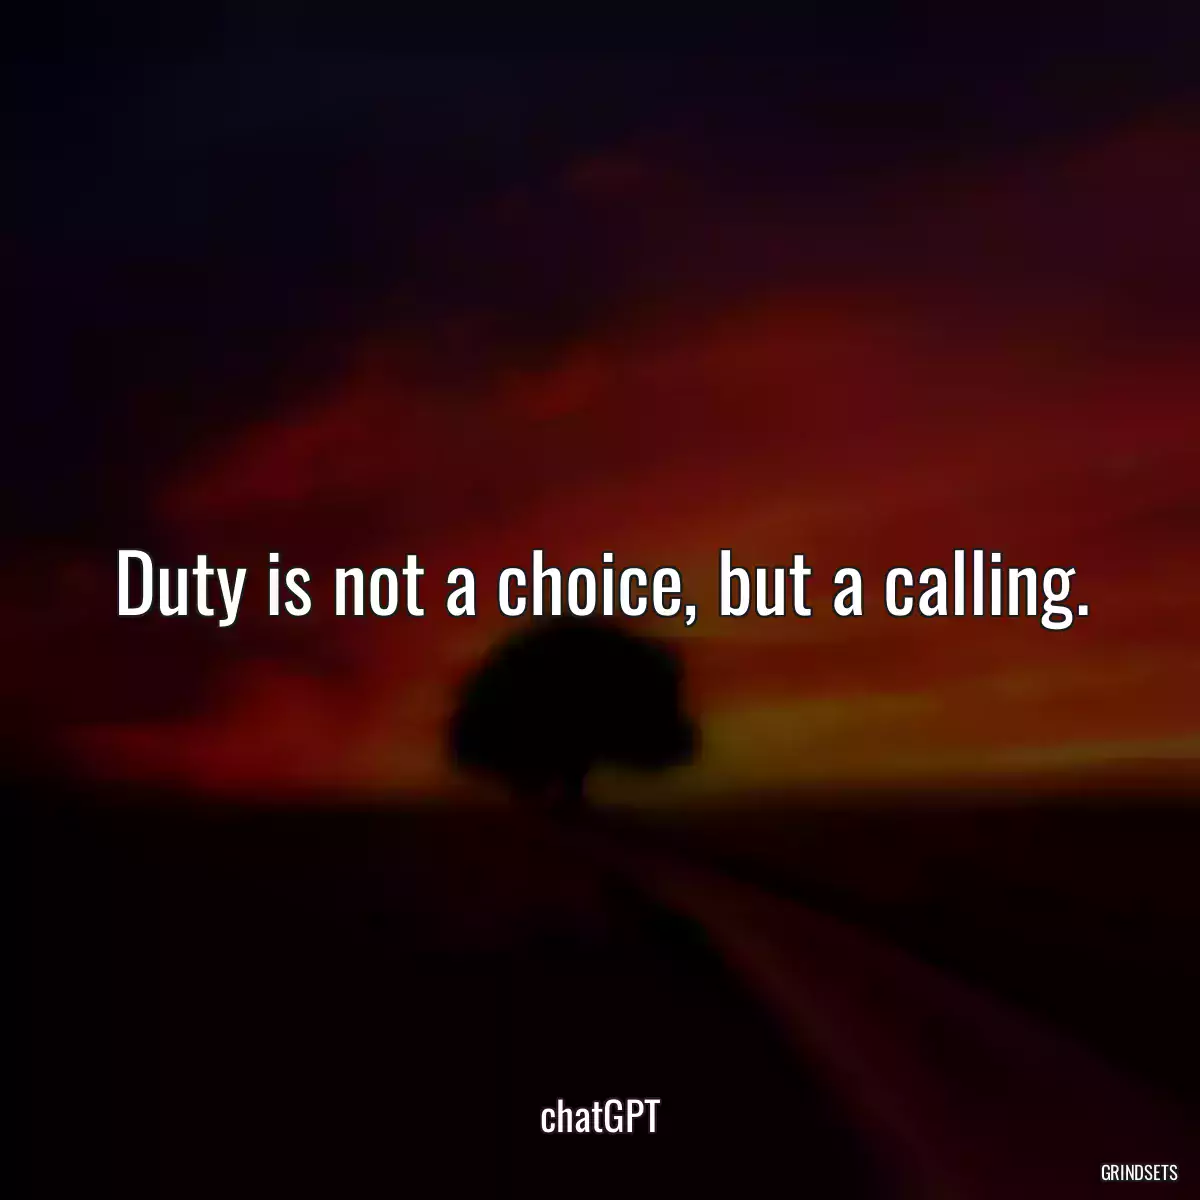 Duty is not a choice, but a calling.